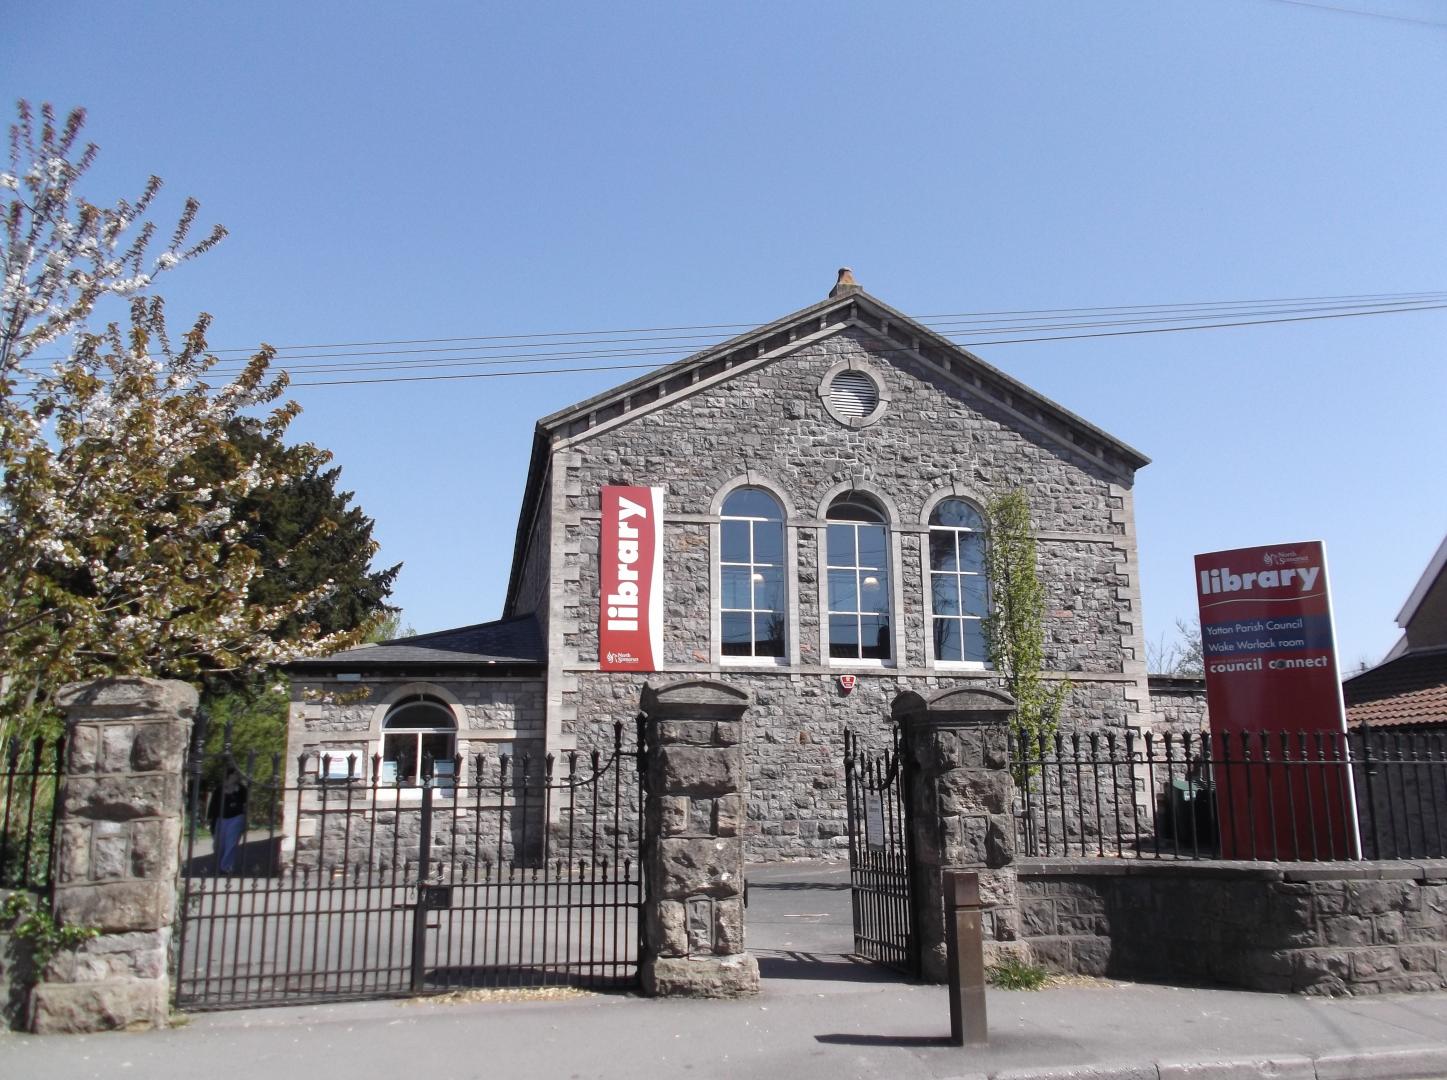 A picture of a grey stone building with three windows, an iron fence and a tall red sign